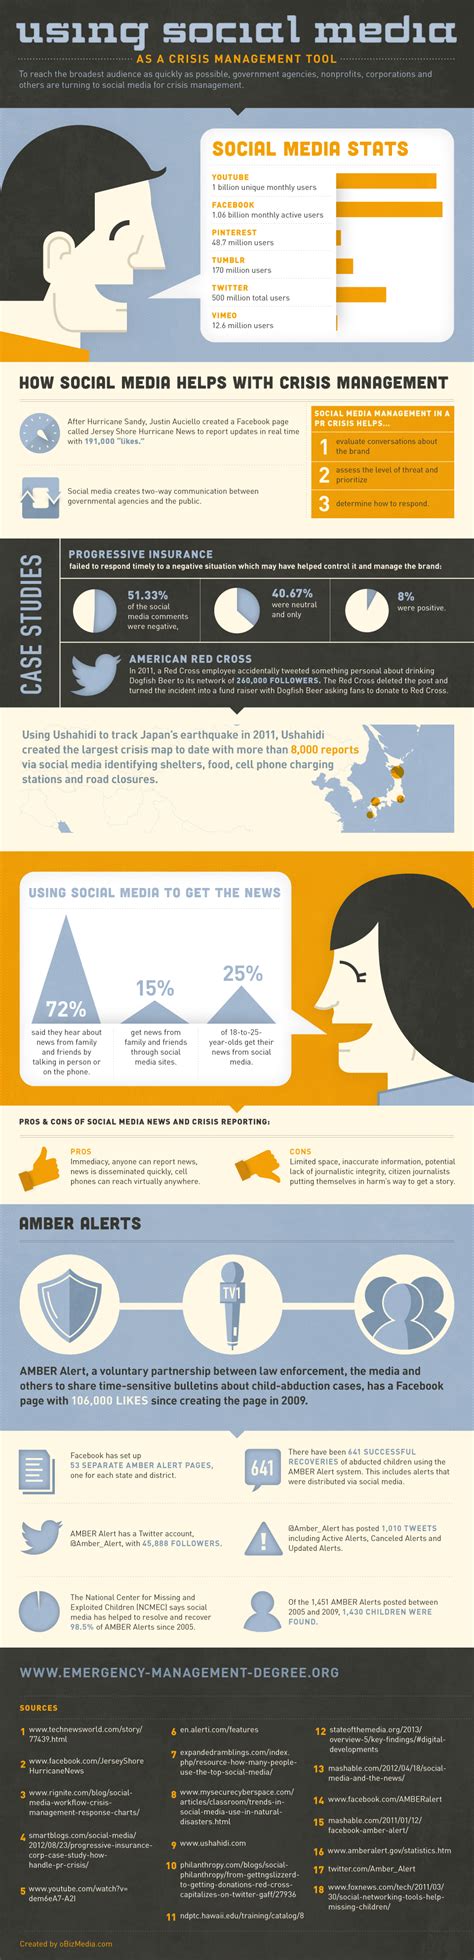 Social Media As A Crisis Management Tool Infographic